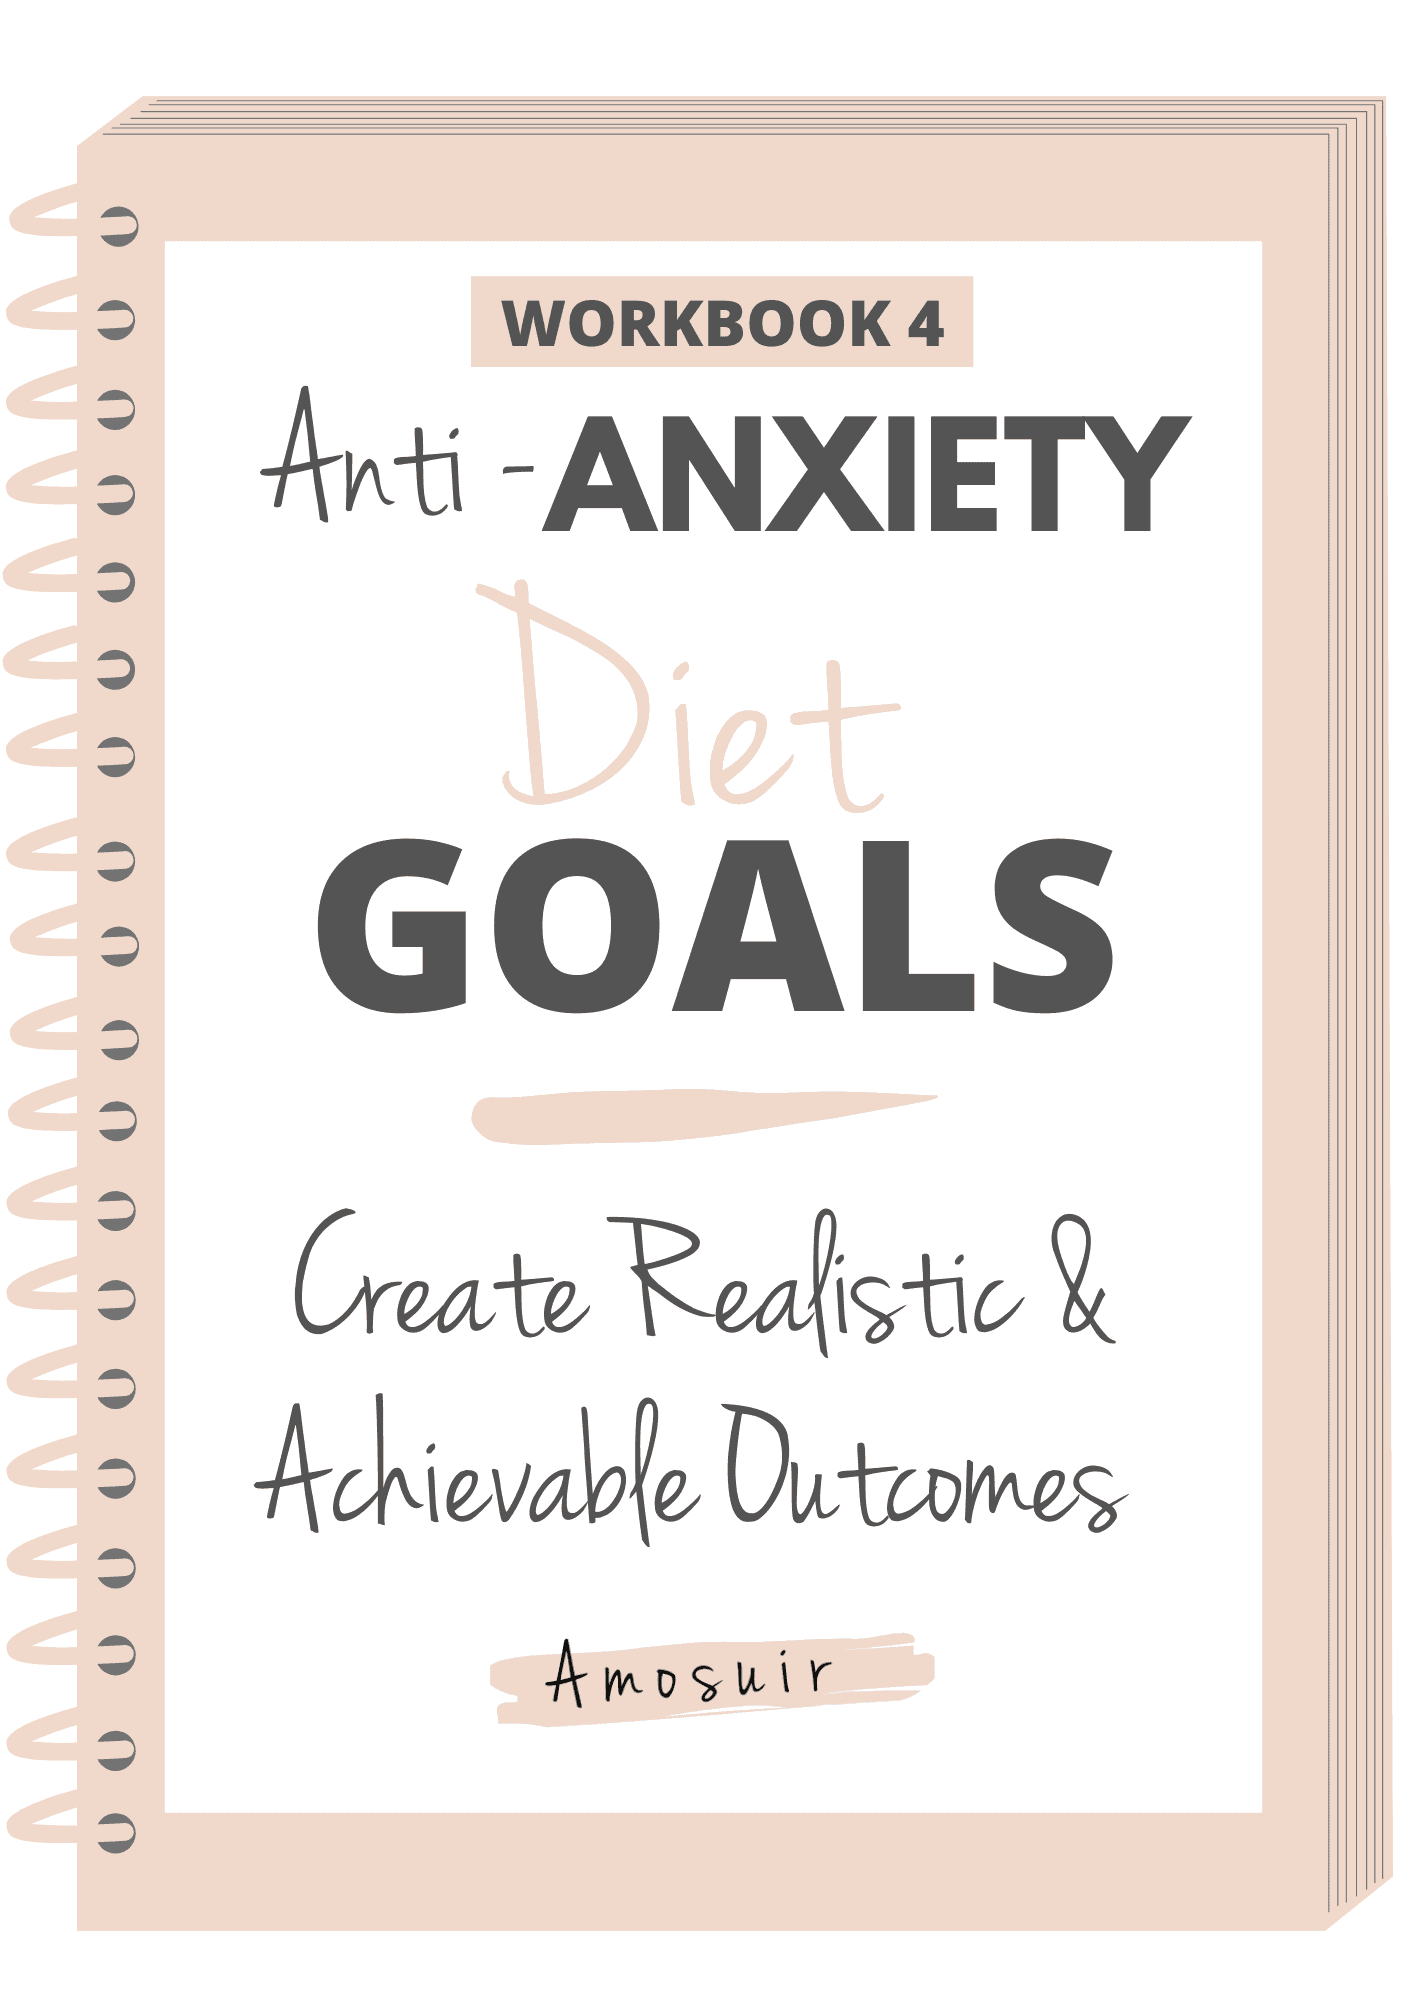 Anti-anxiety diet goals workbook front cover